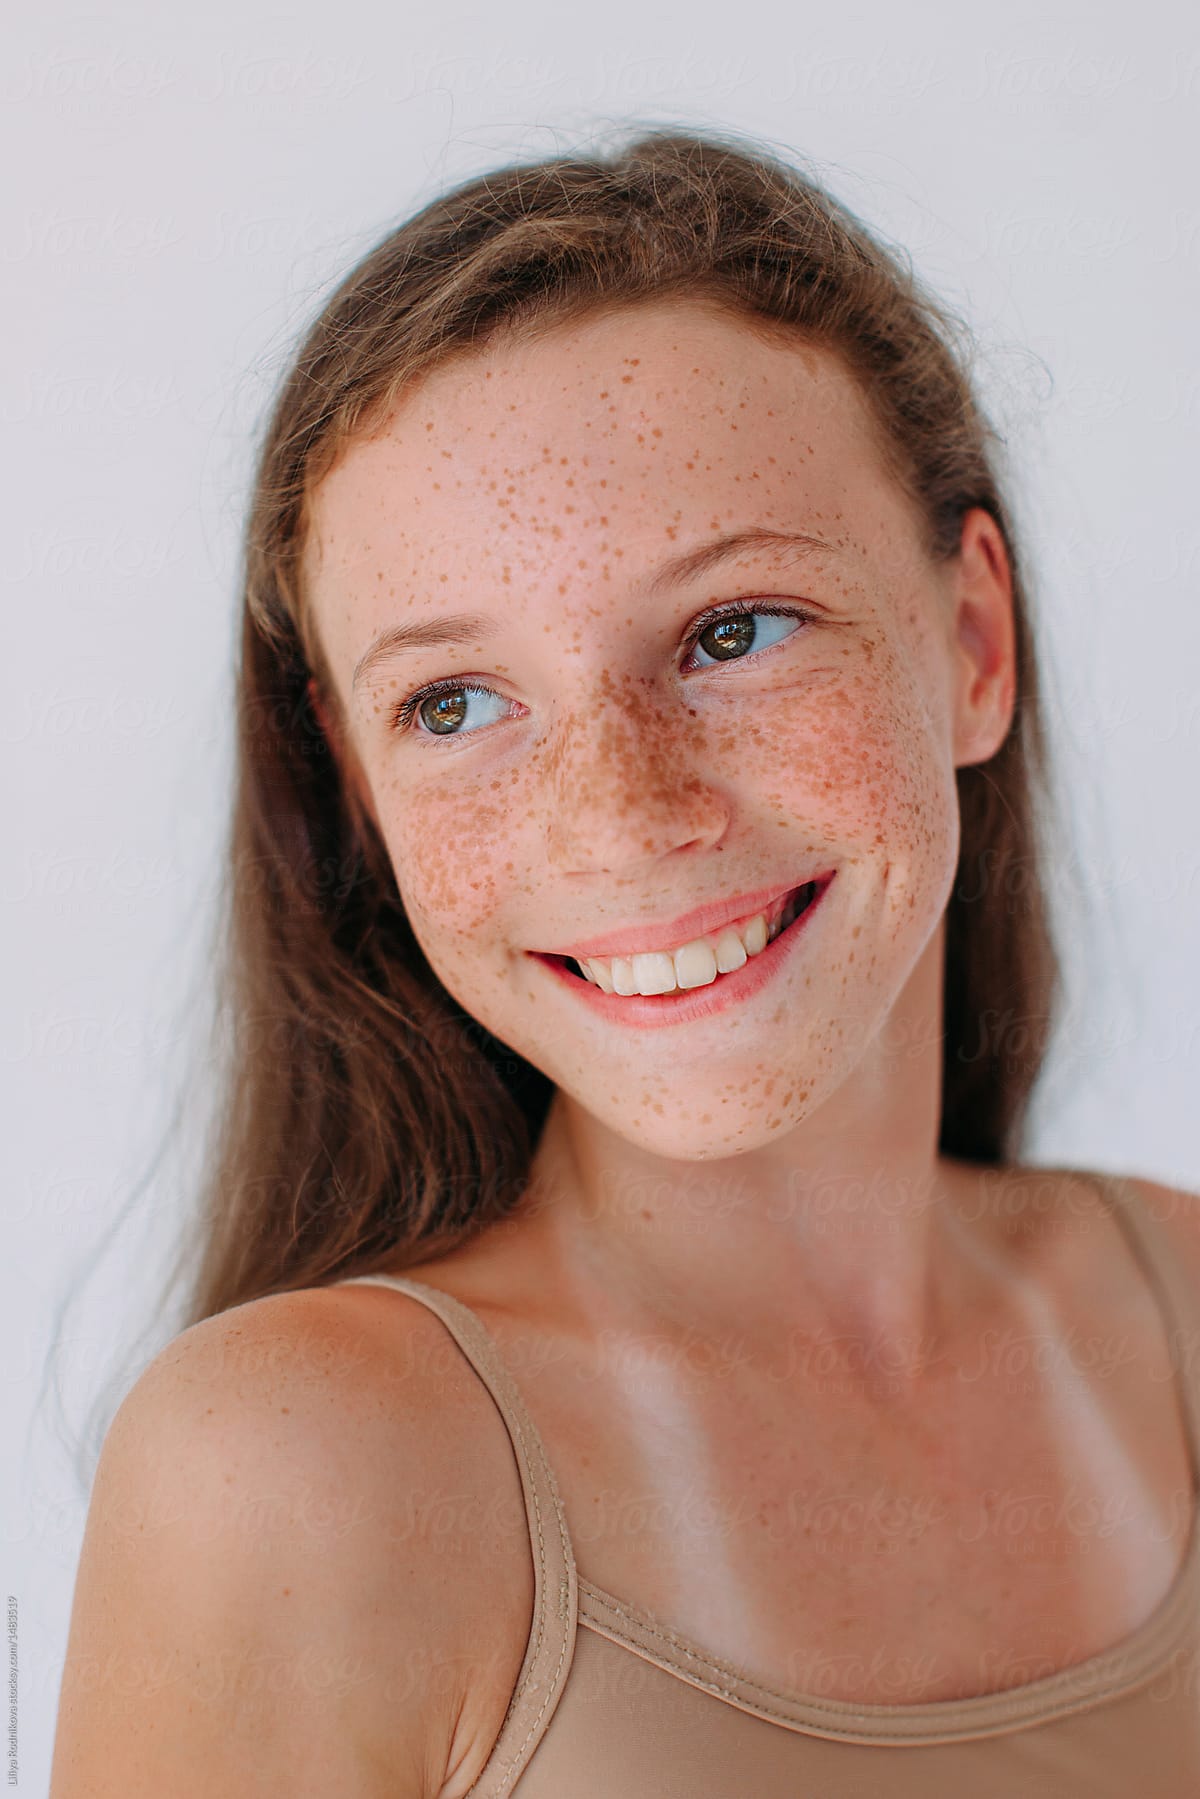 Beauty Portrait Of Attractive Smiling Girl With Freckles And Long Hair By Liliya Rodnikova 5130